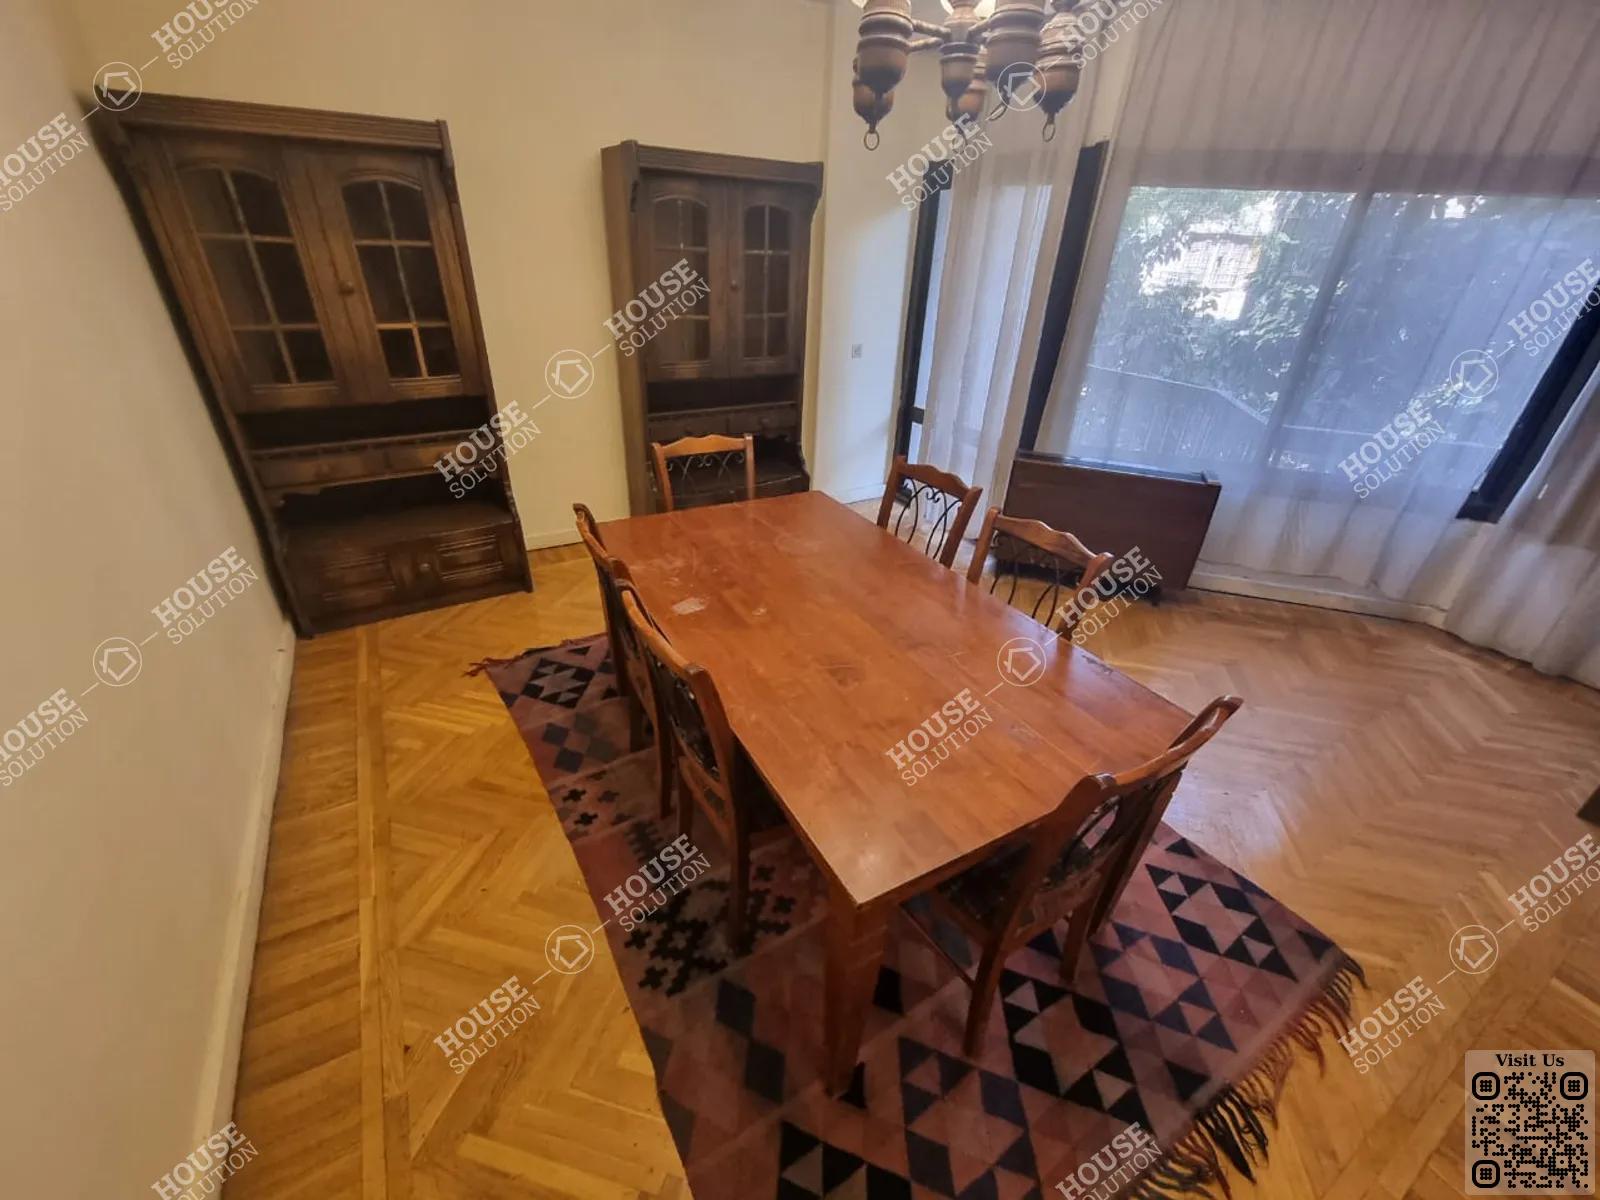 DINING AREA @ Apartments For Rent In Maadi Maadi Sarayat Area: 175 m² consists of 3 Bedrooms 3 Bathrooms Furnished 5 stars #5598-2